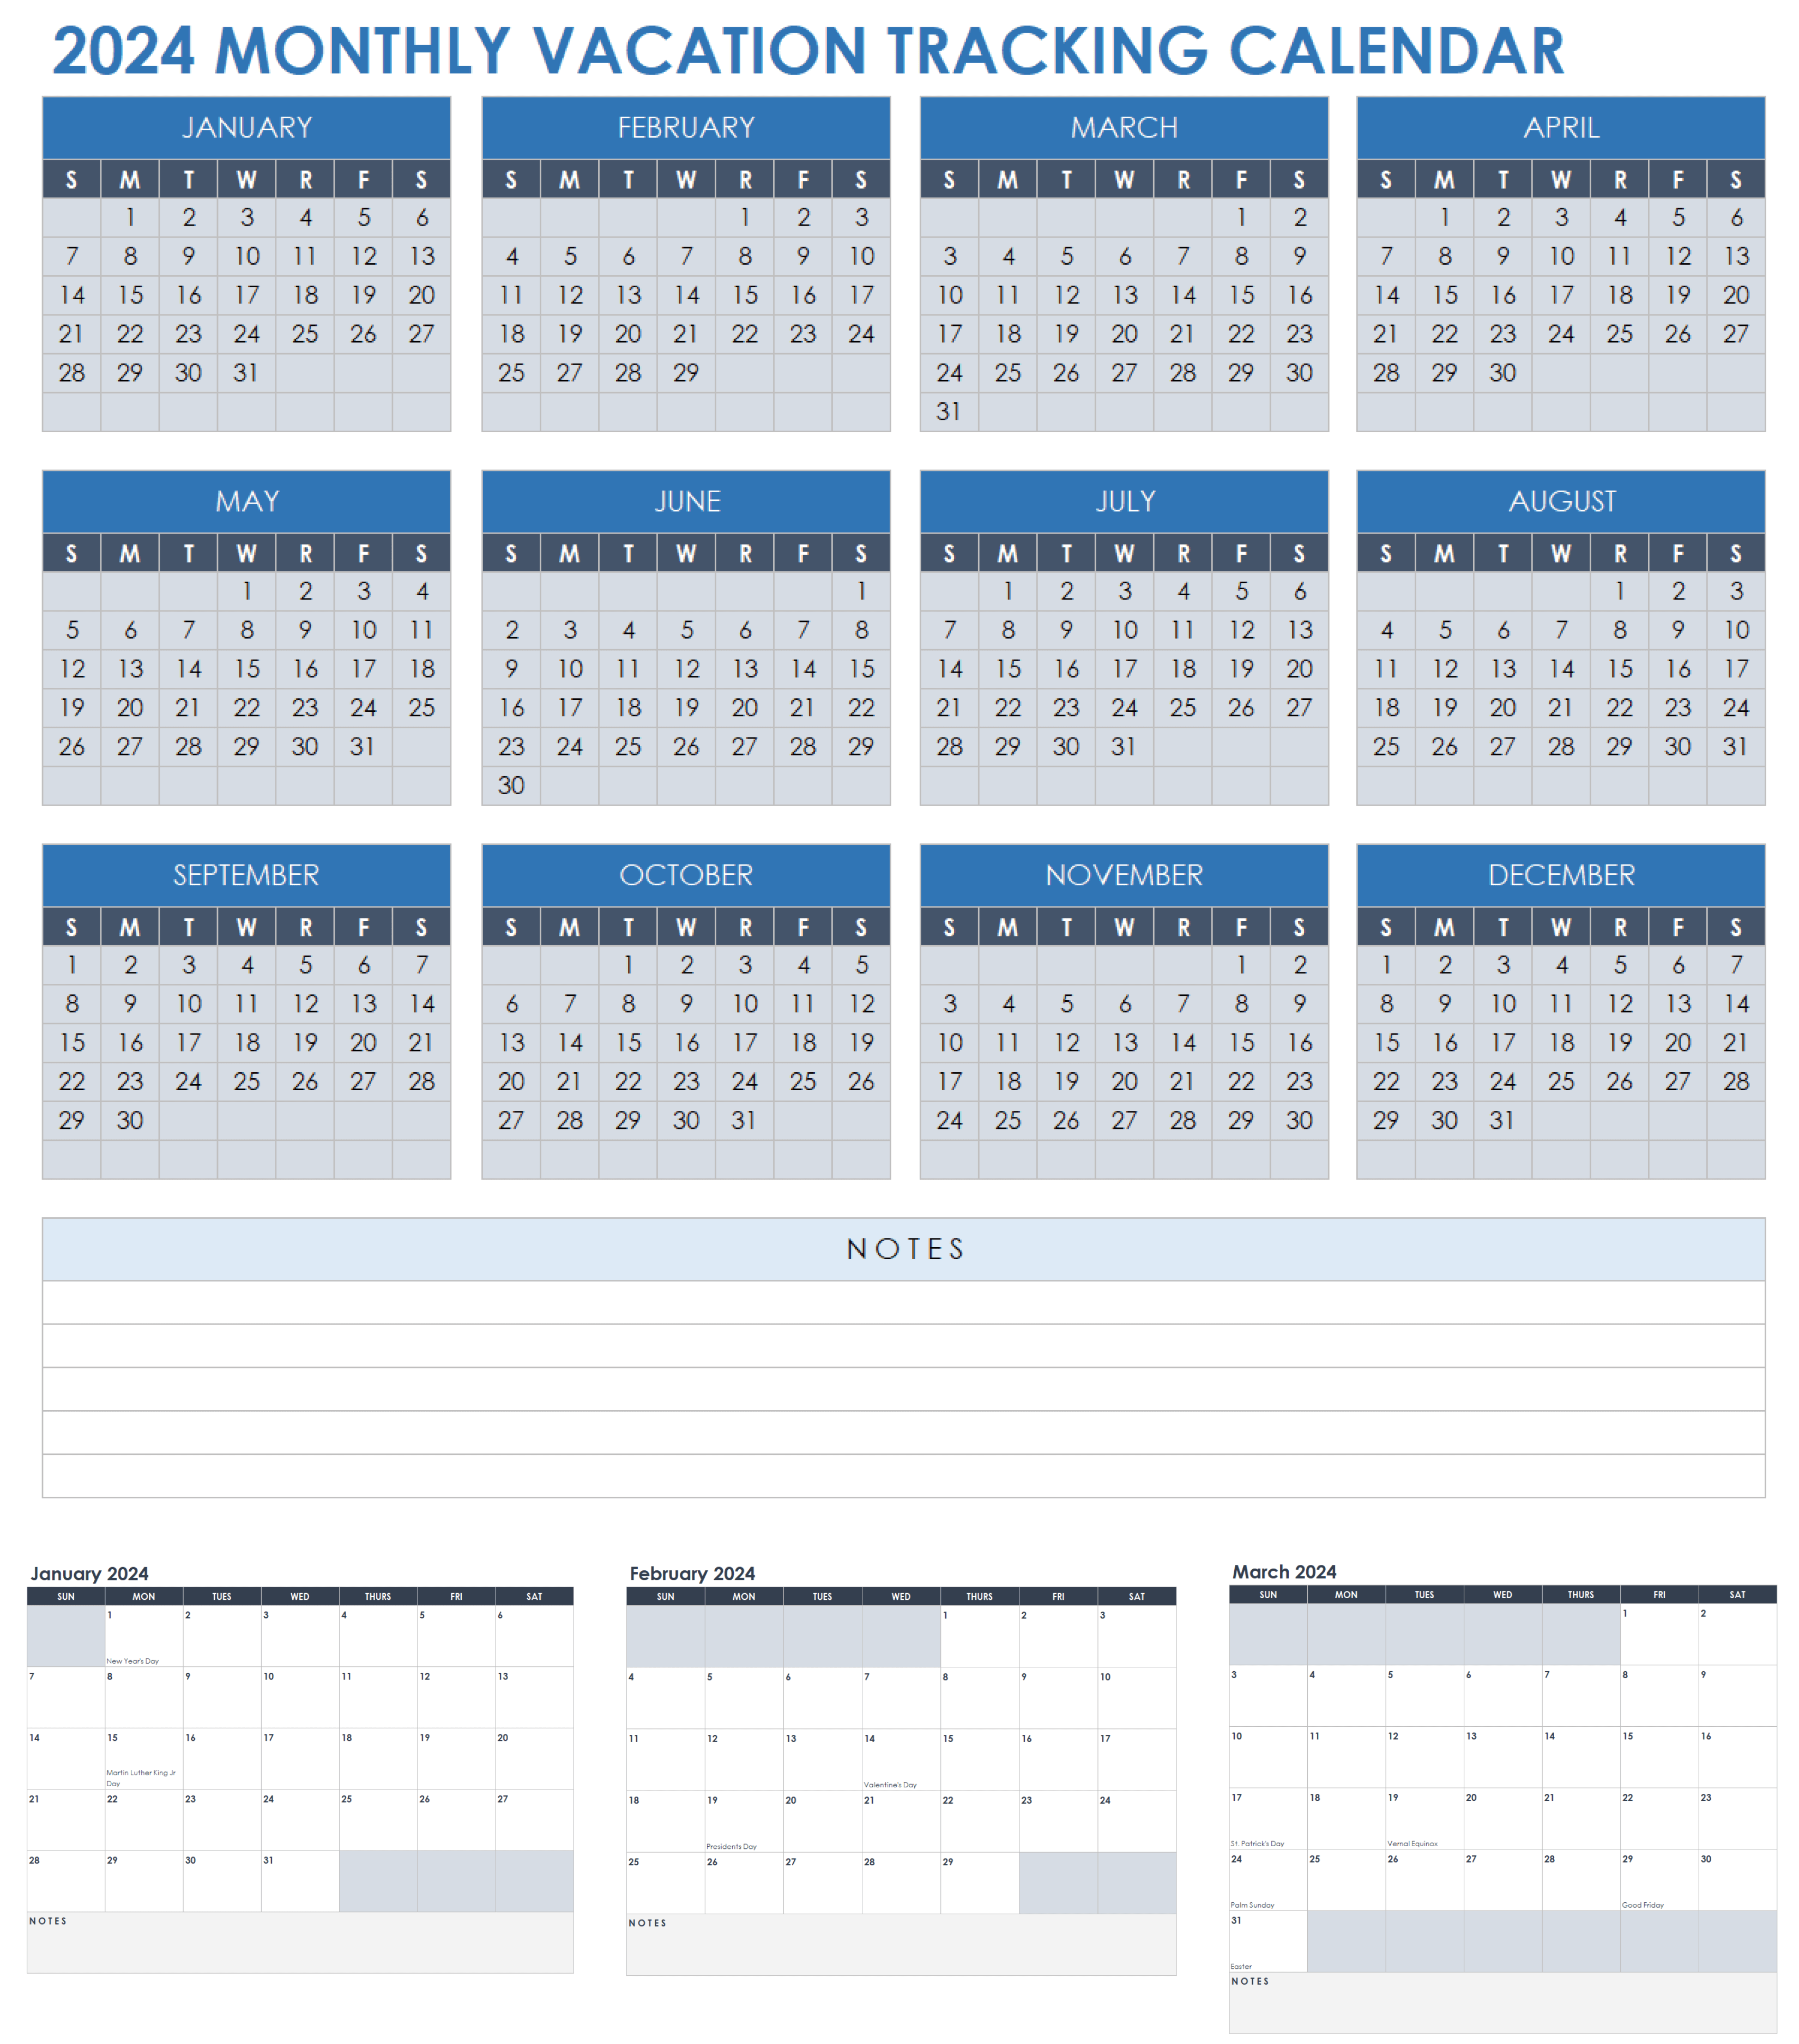 2024 Monthly Vacation Tracking Calendar